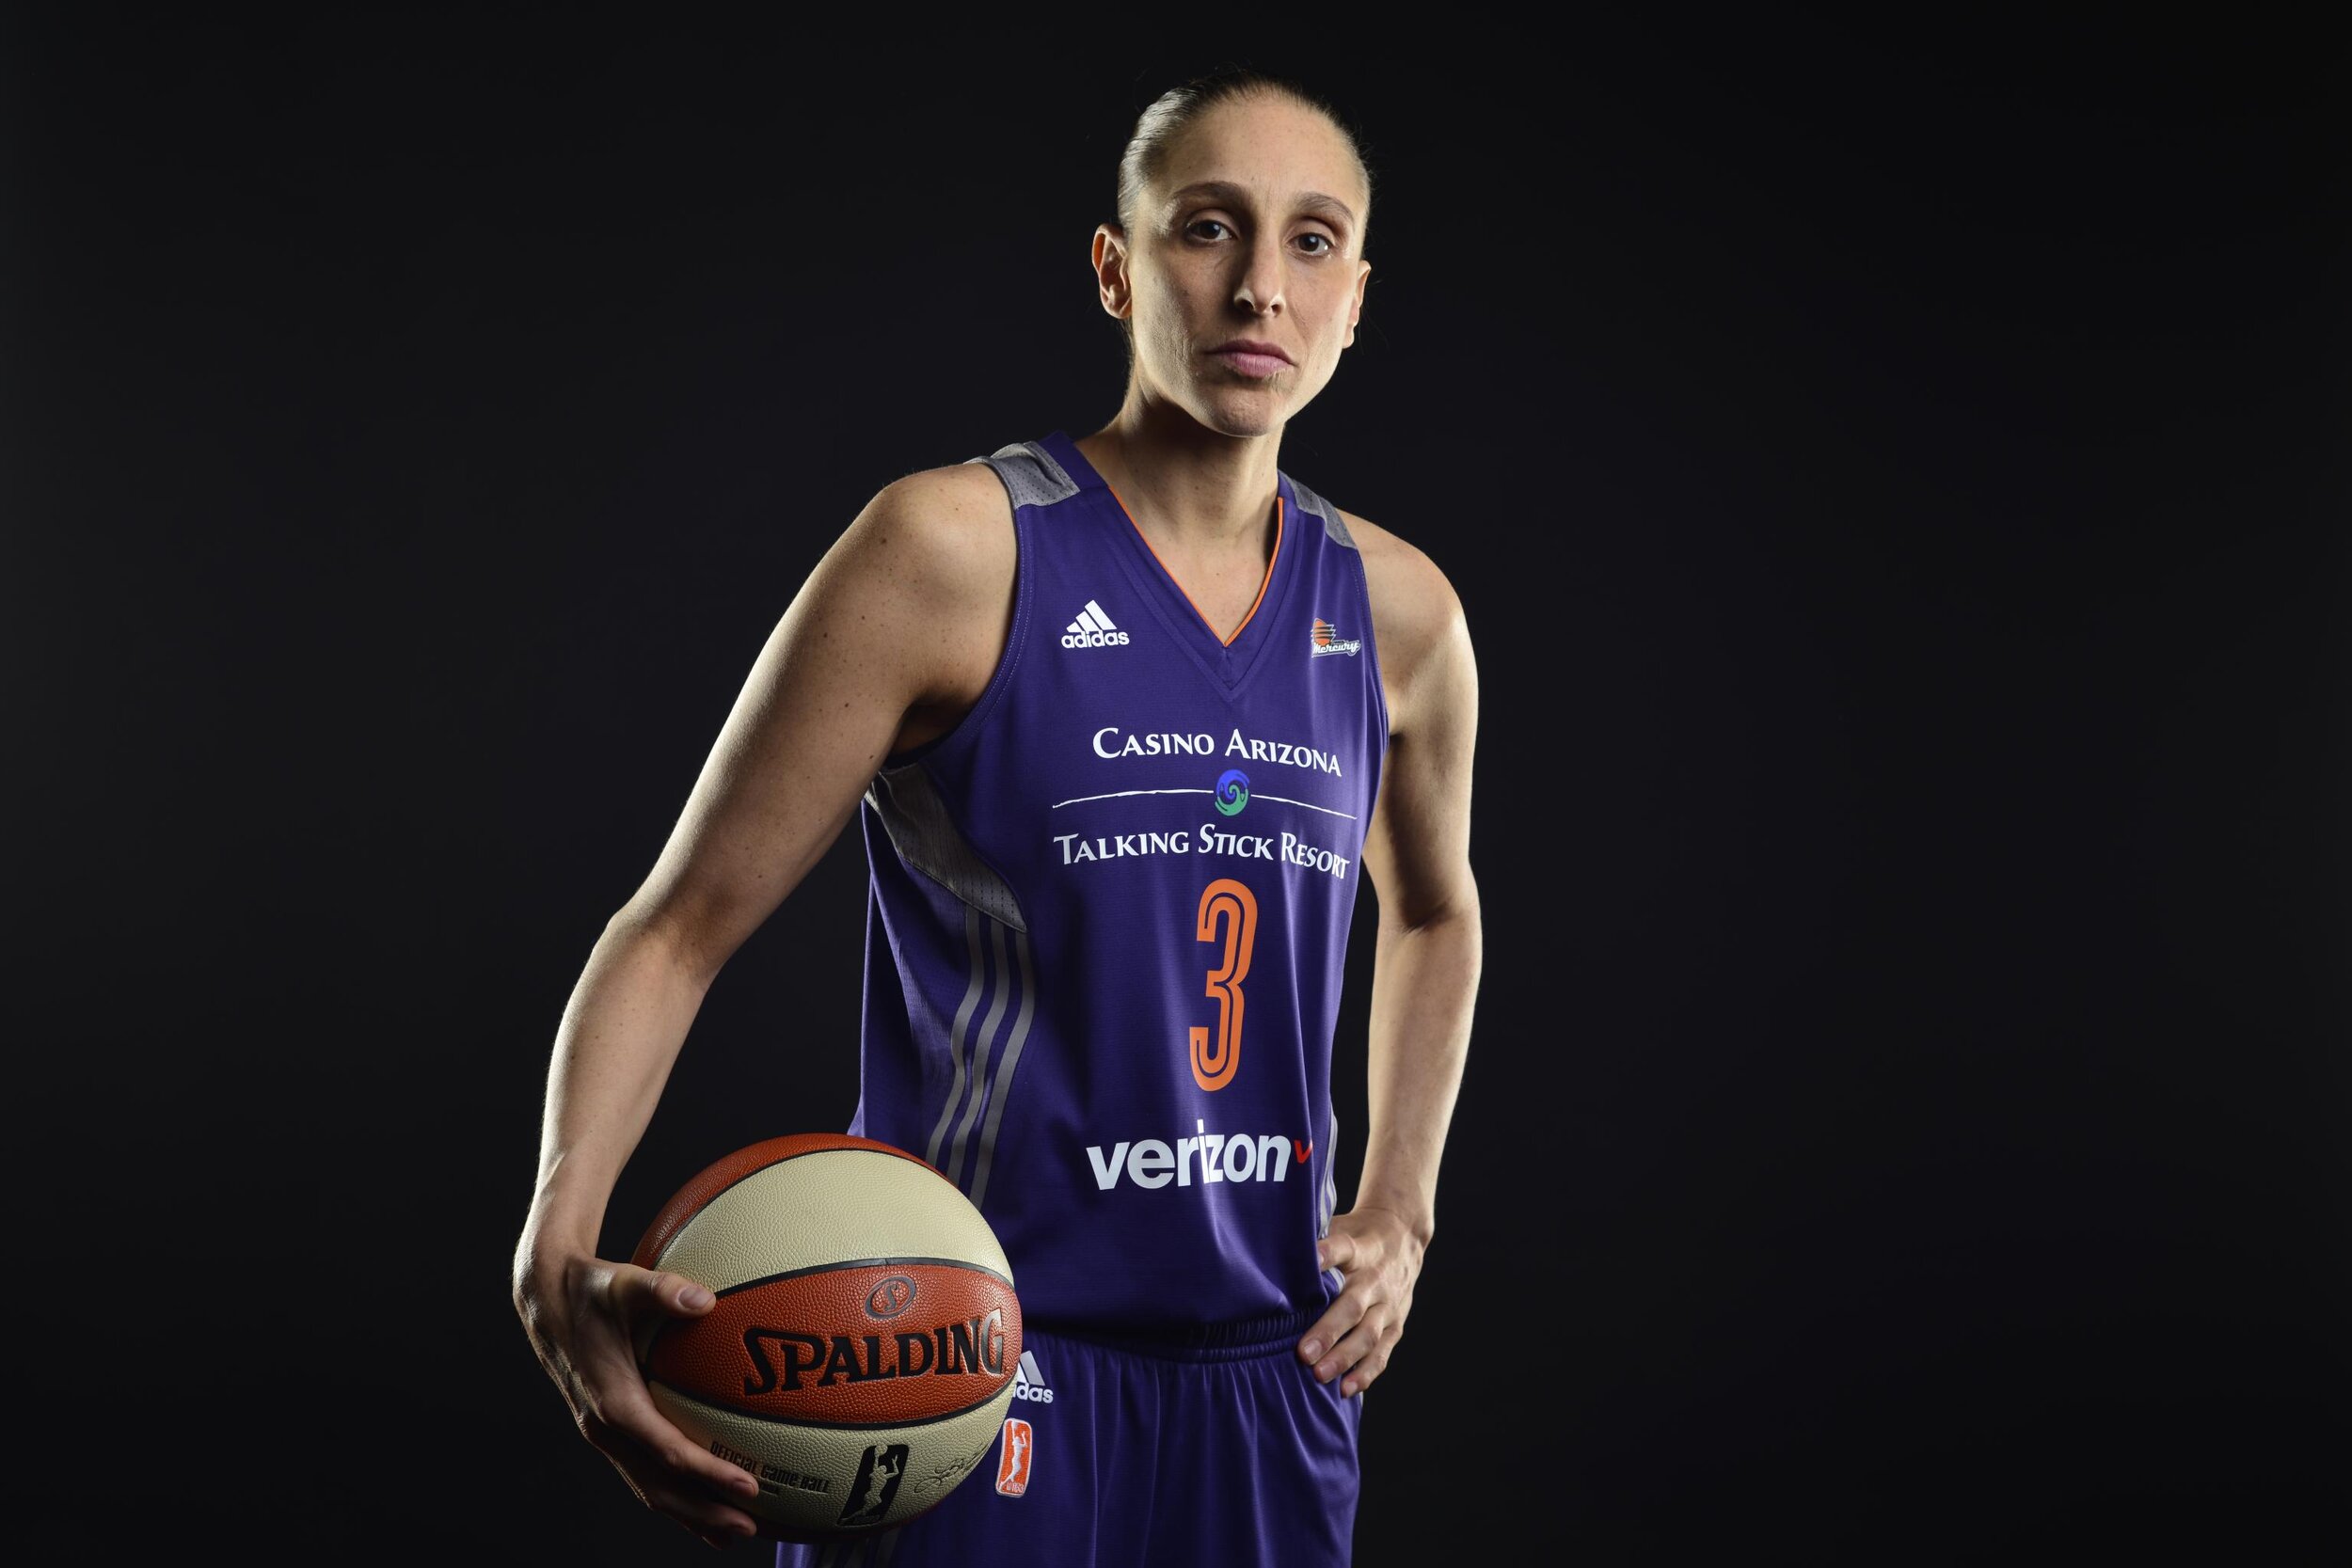 What is Diana Taurasi's career high in points scored in an NCAA game?